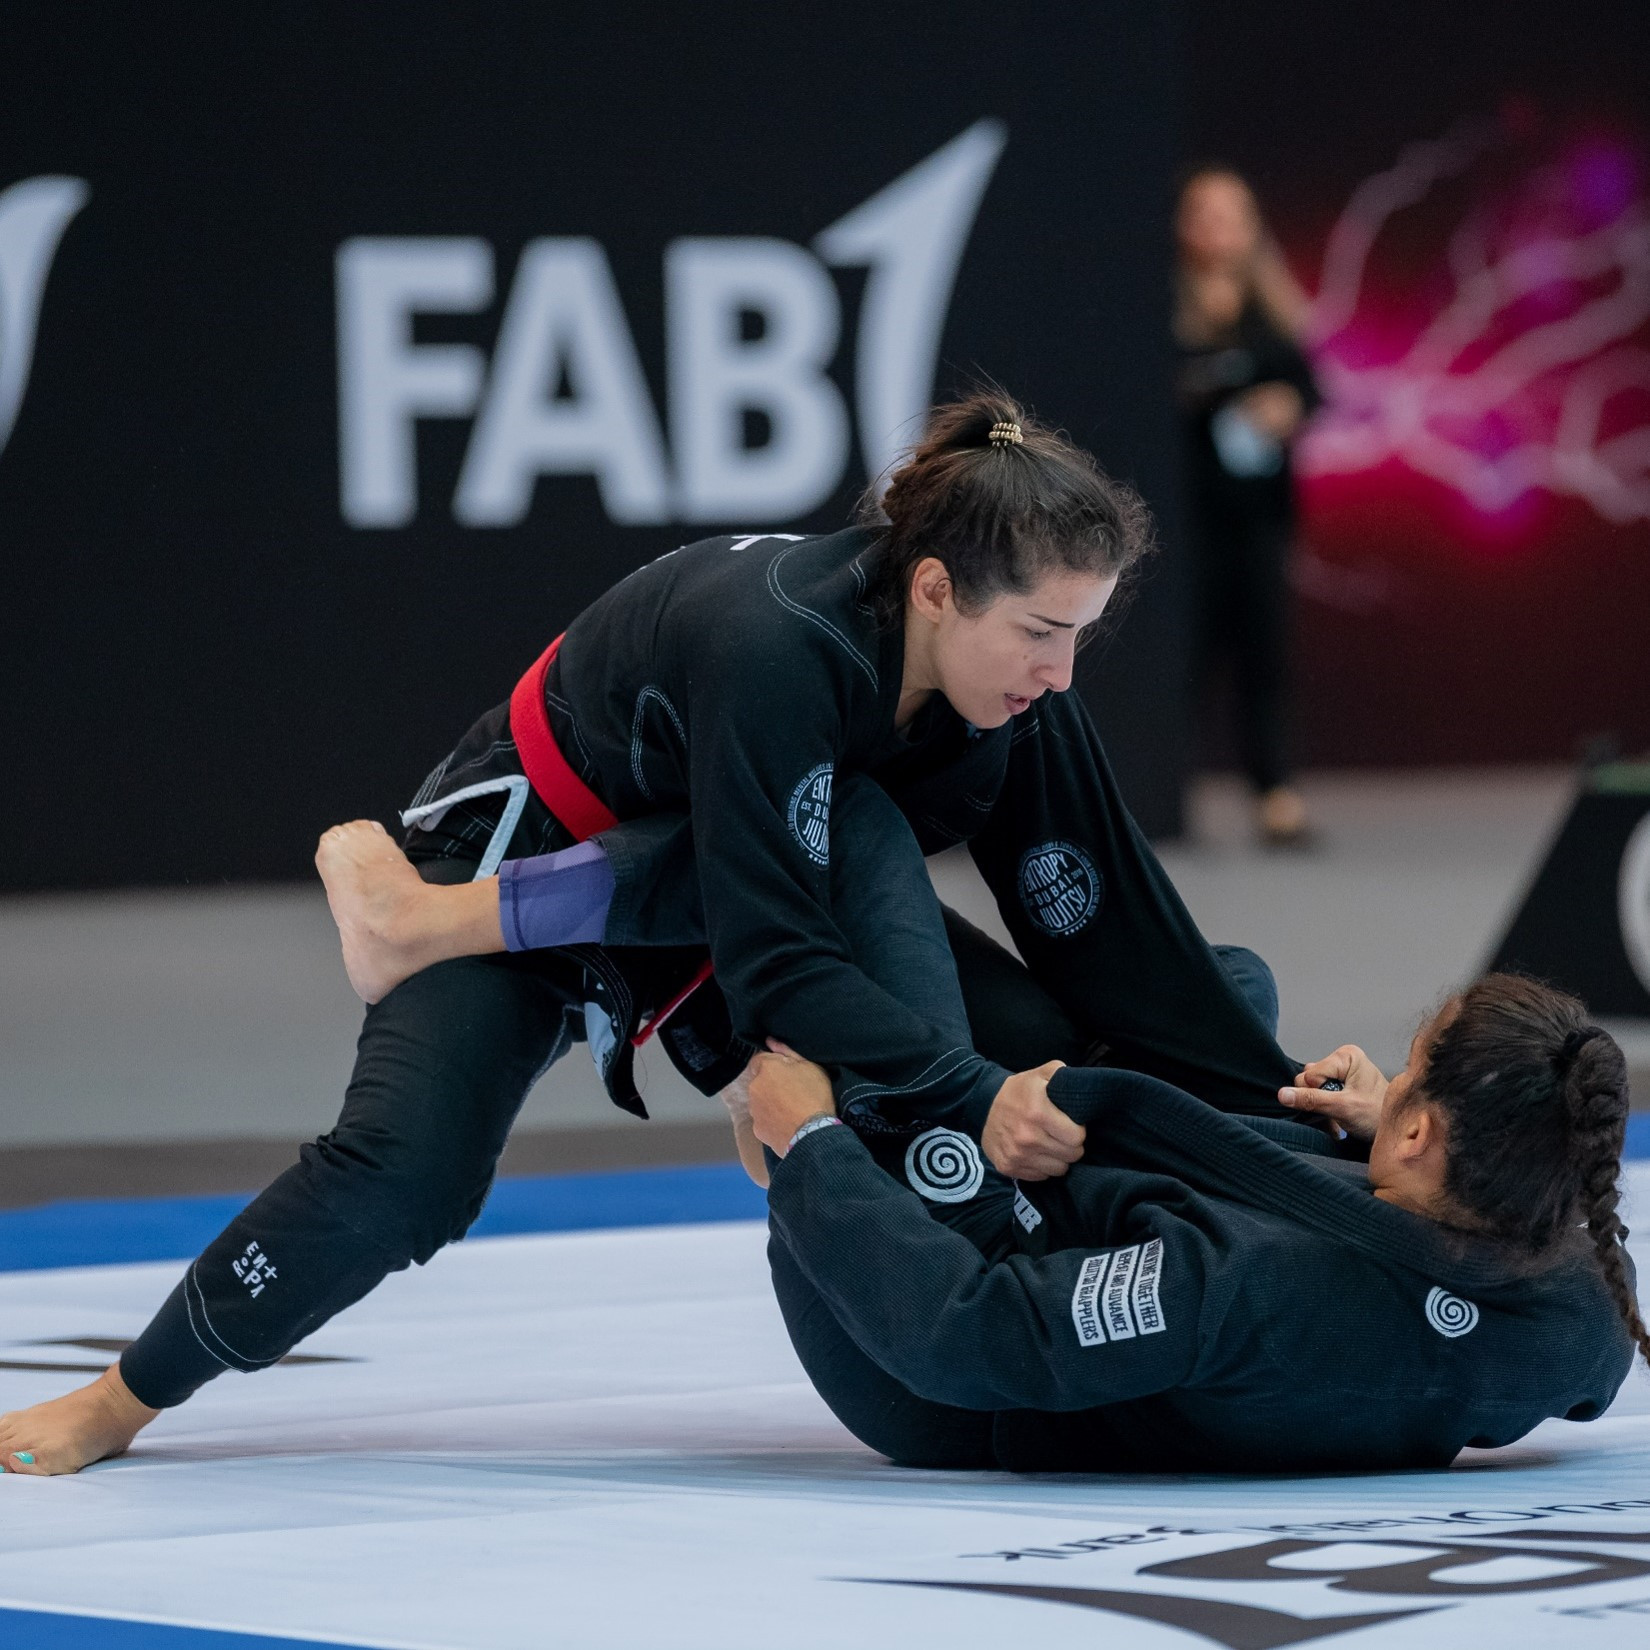 Up to 1000 AJP ranking points were available to athletes in each weight class, which is credited for the large turnout ©UAEJJF